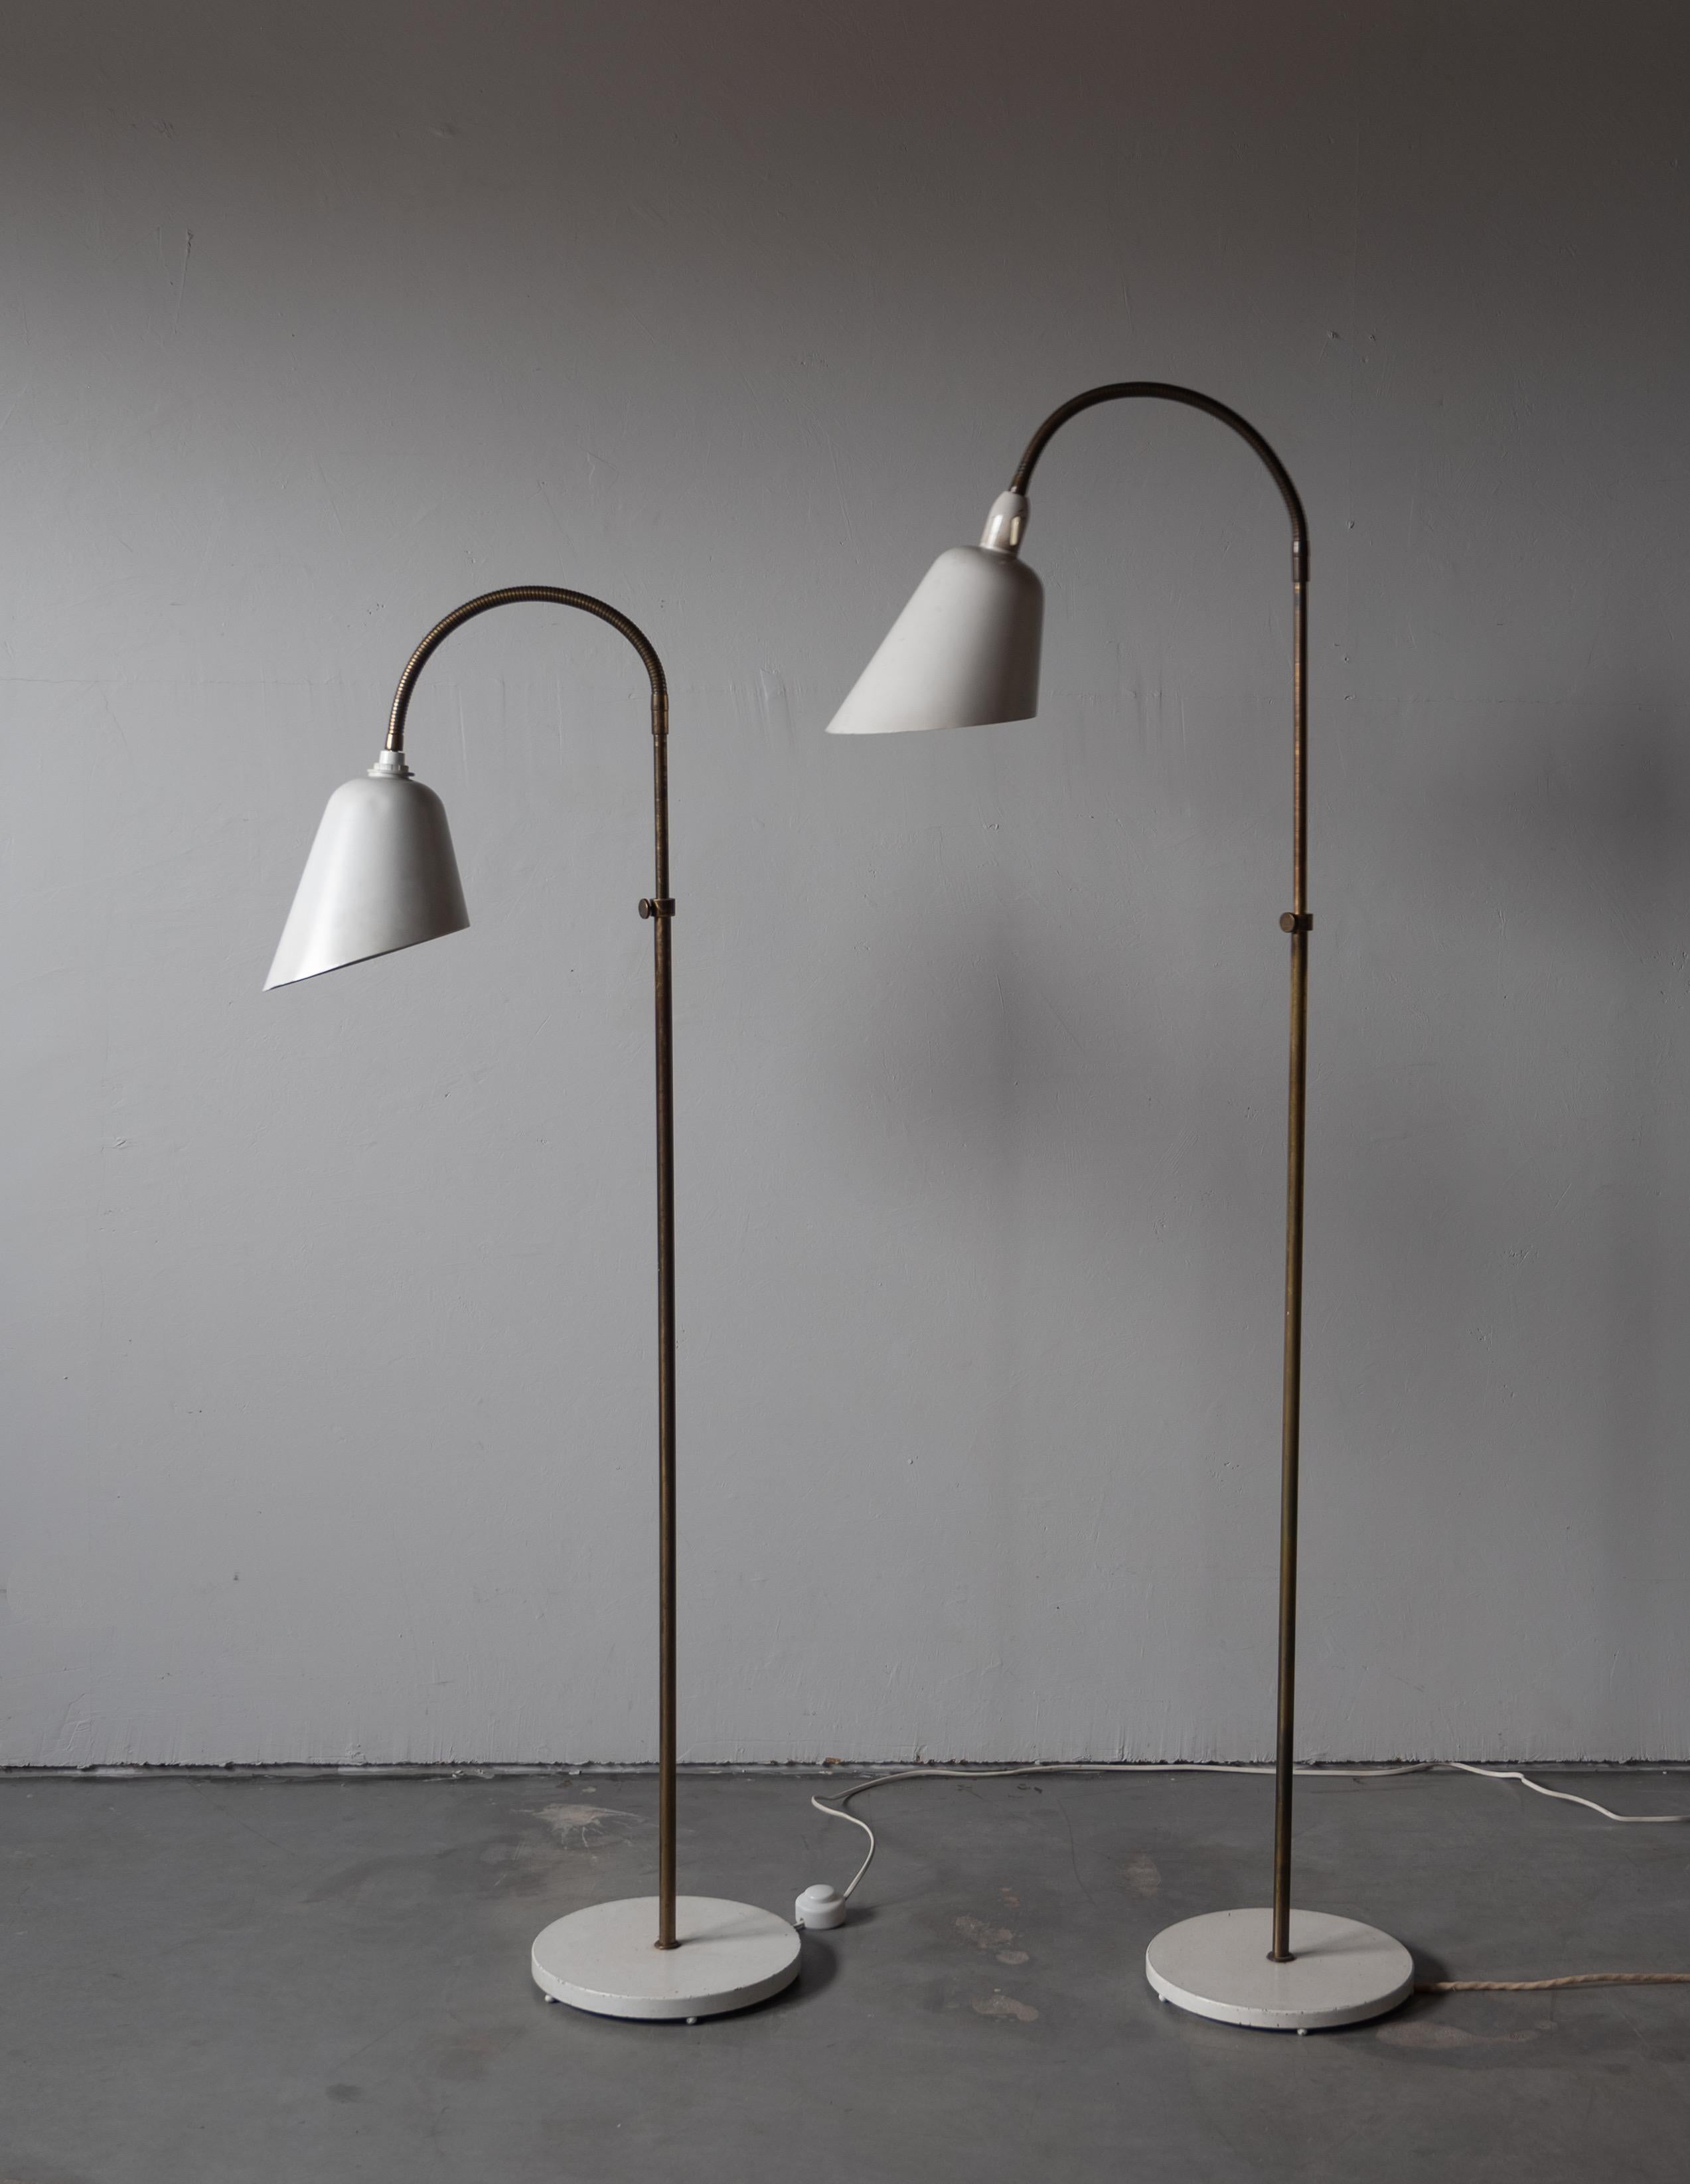 A pair of early production adjustable floor lamps. Designed by Arne Jacobsen in 1929, produced by Louis Poulsen, Denmark, c. 1930s-1940s.

Features lacquered metal and brass. 

Dimensions variable. Mounting for metal lampshades varies on each